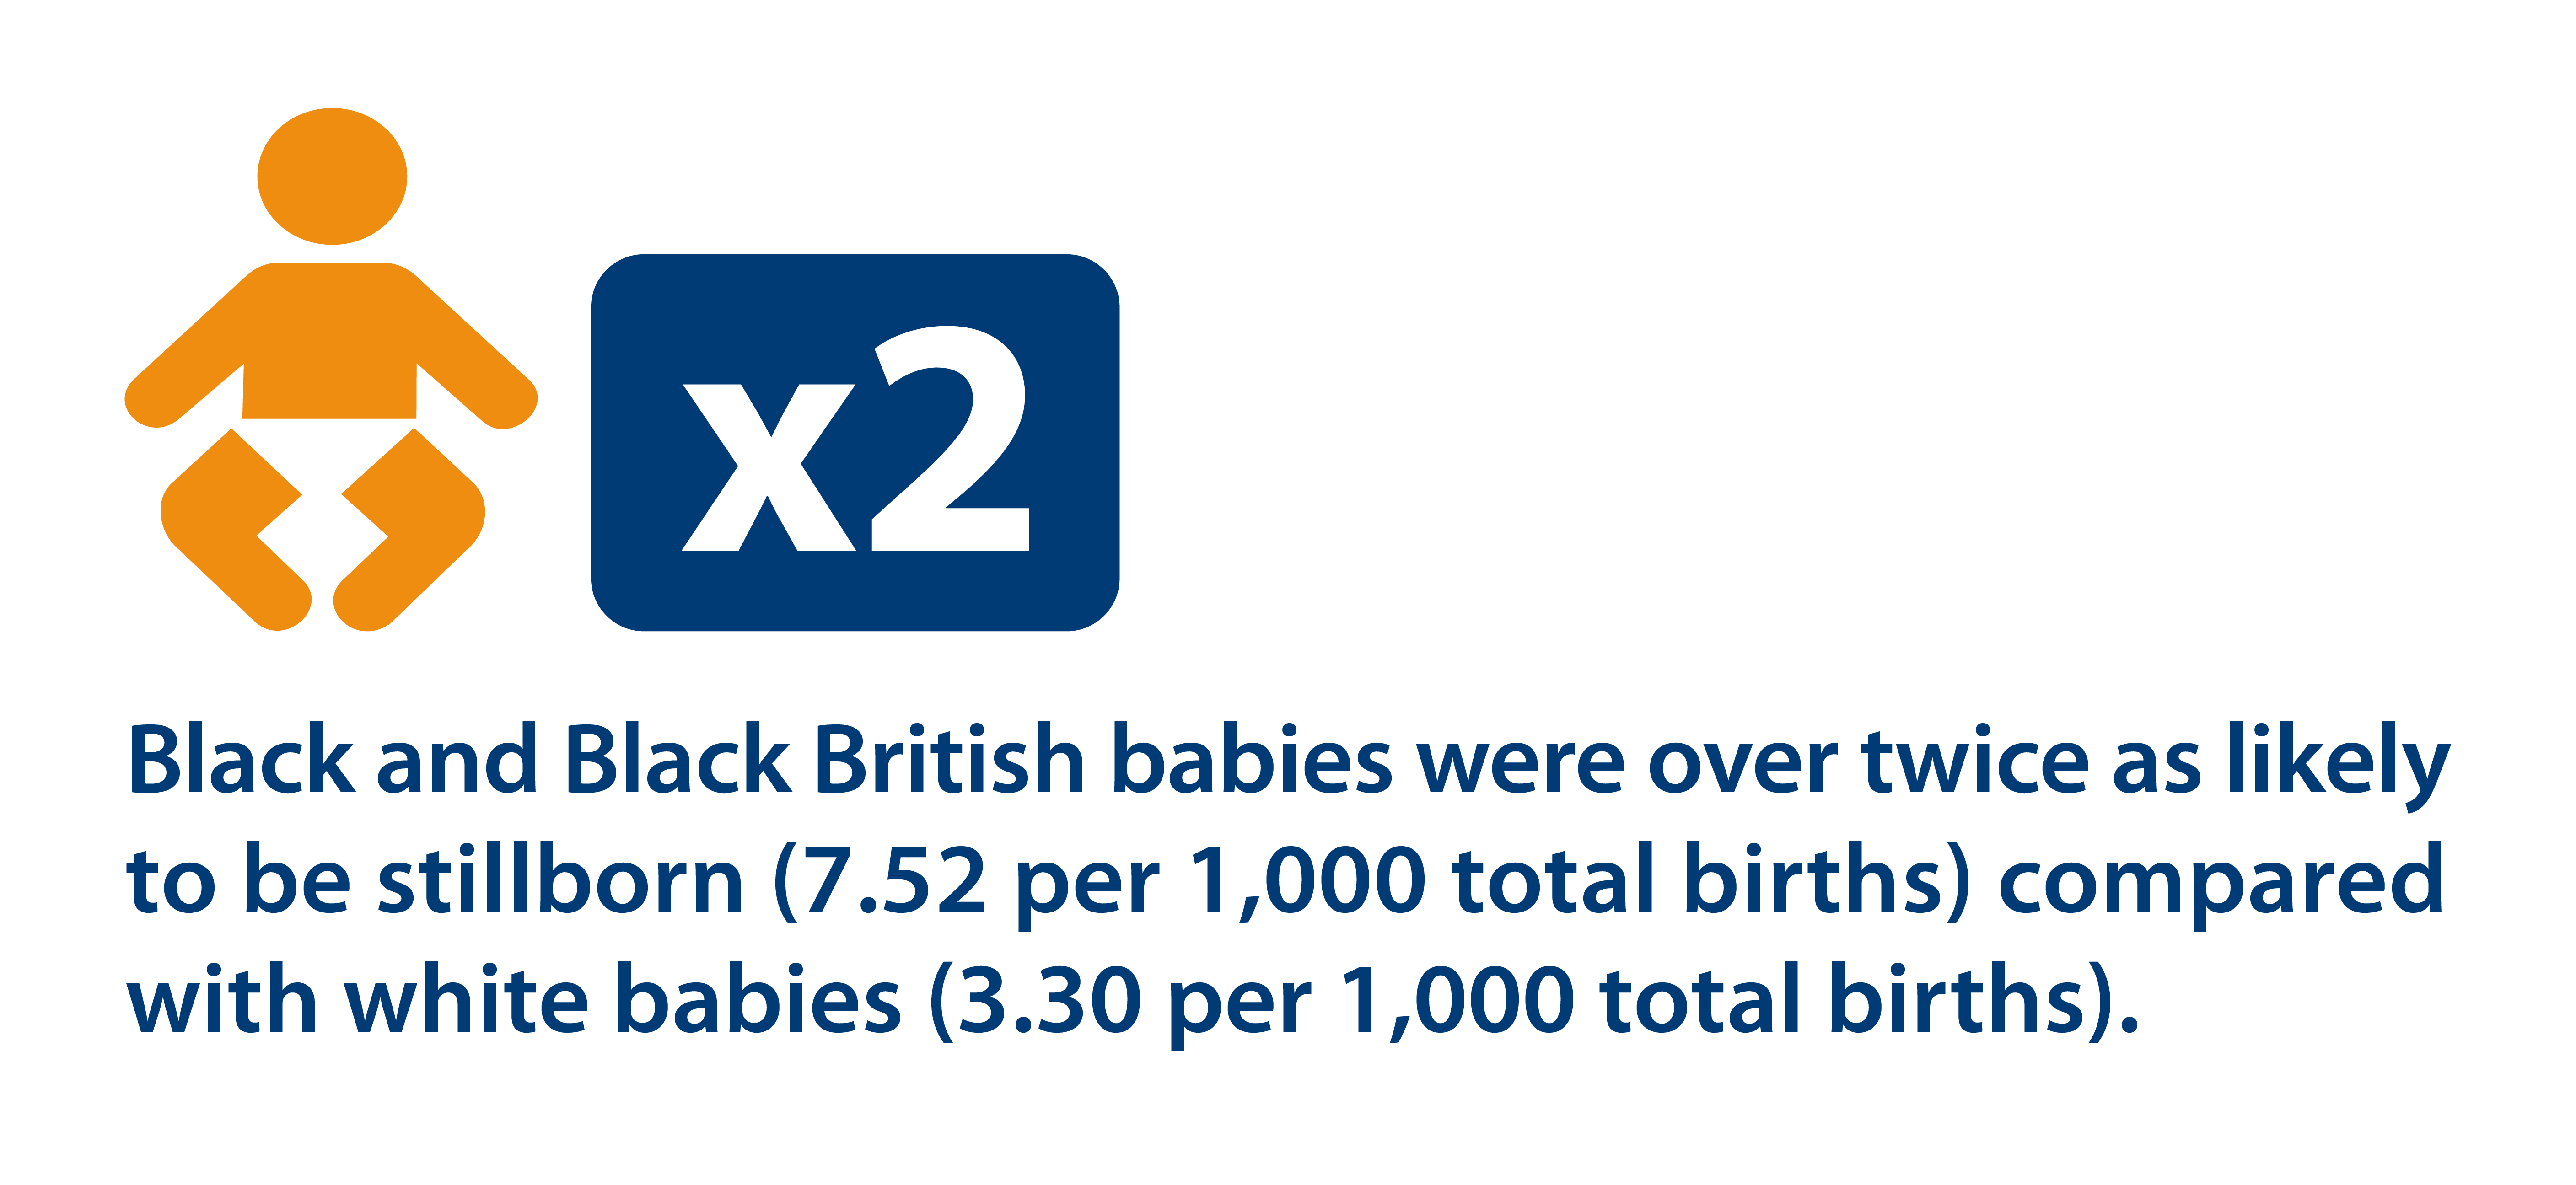 Image with stat from Listening Project Black and British babies were over twice as likely to be stillborn compared to white babies